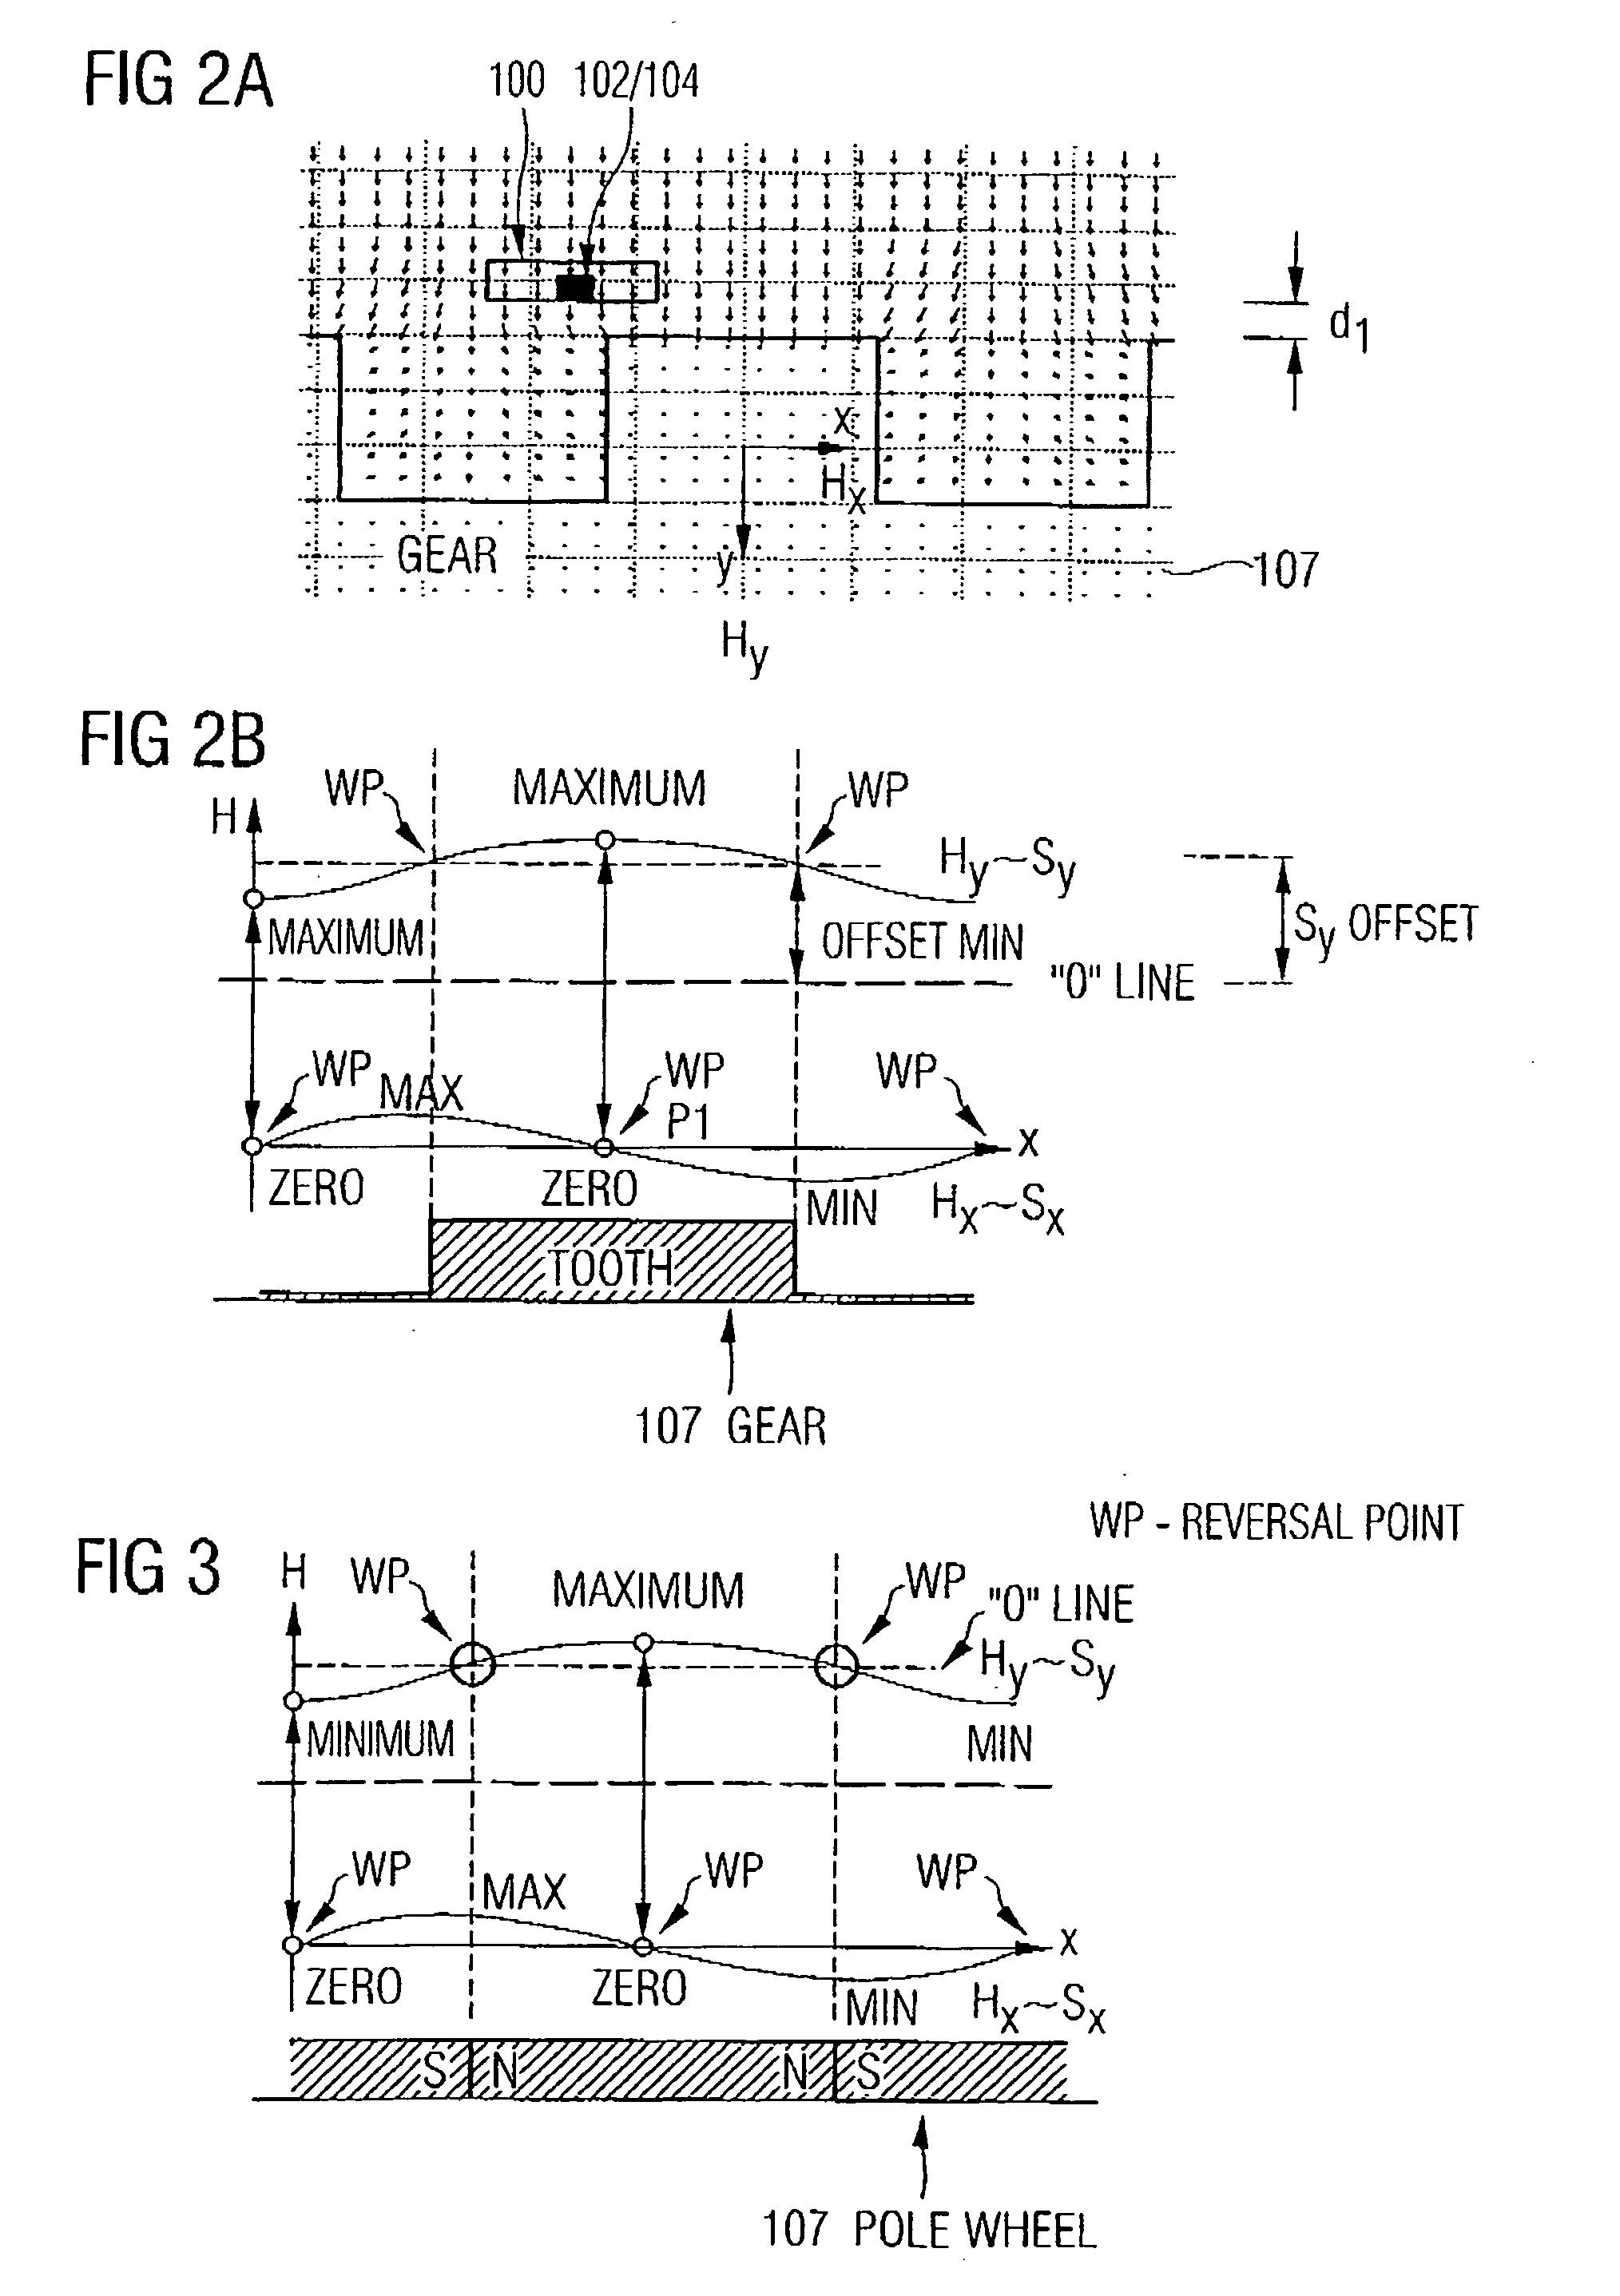 Apparatus and method for the determination of a direction of an object